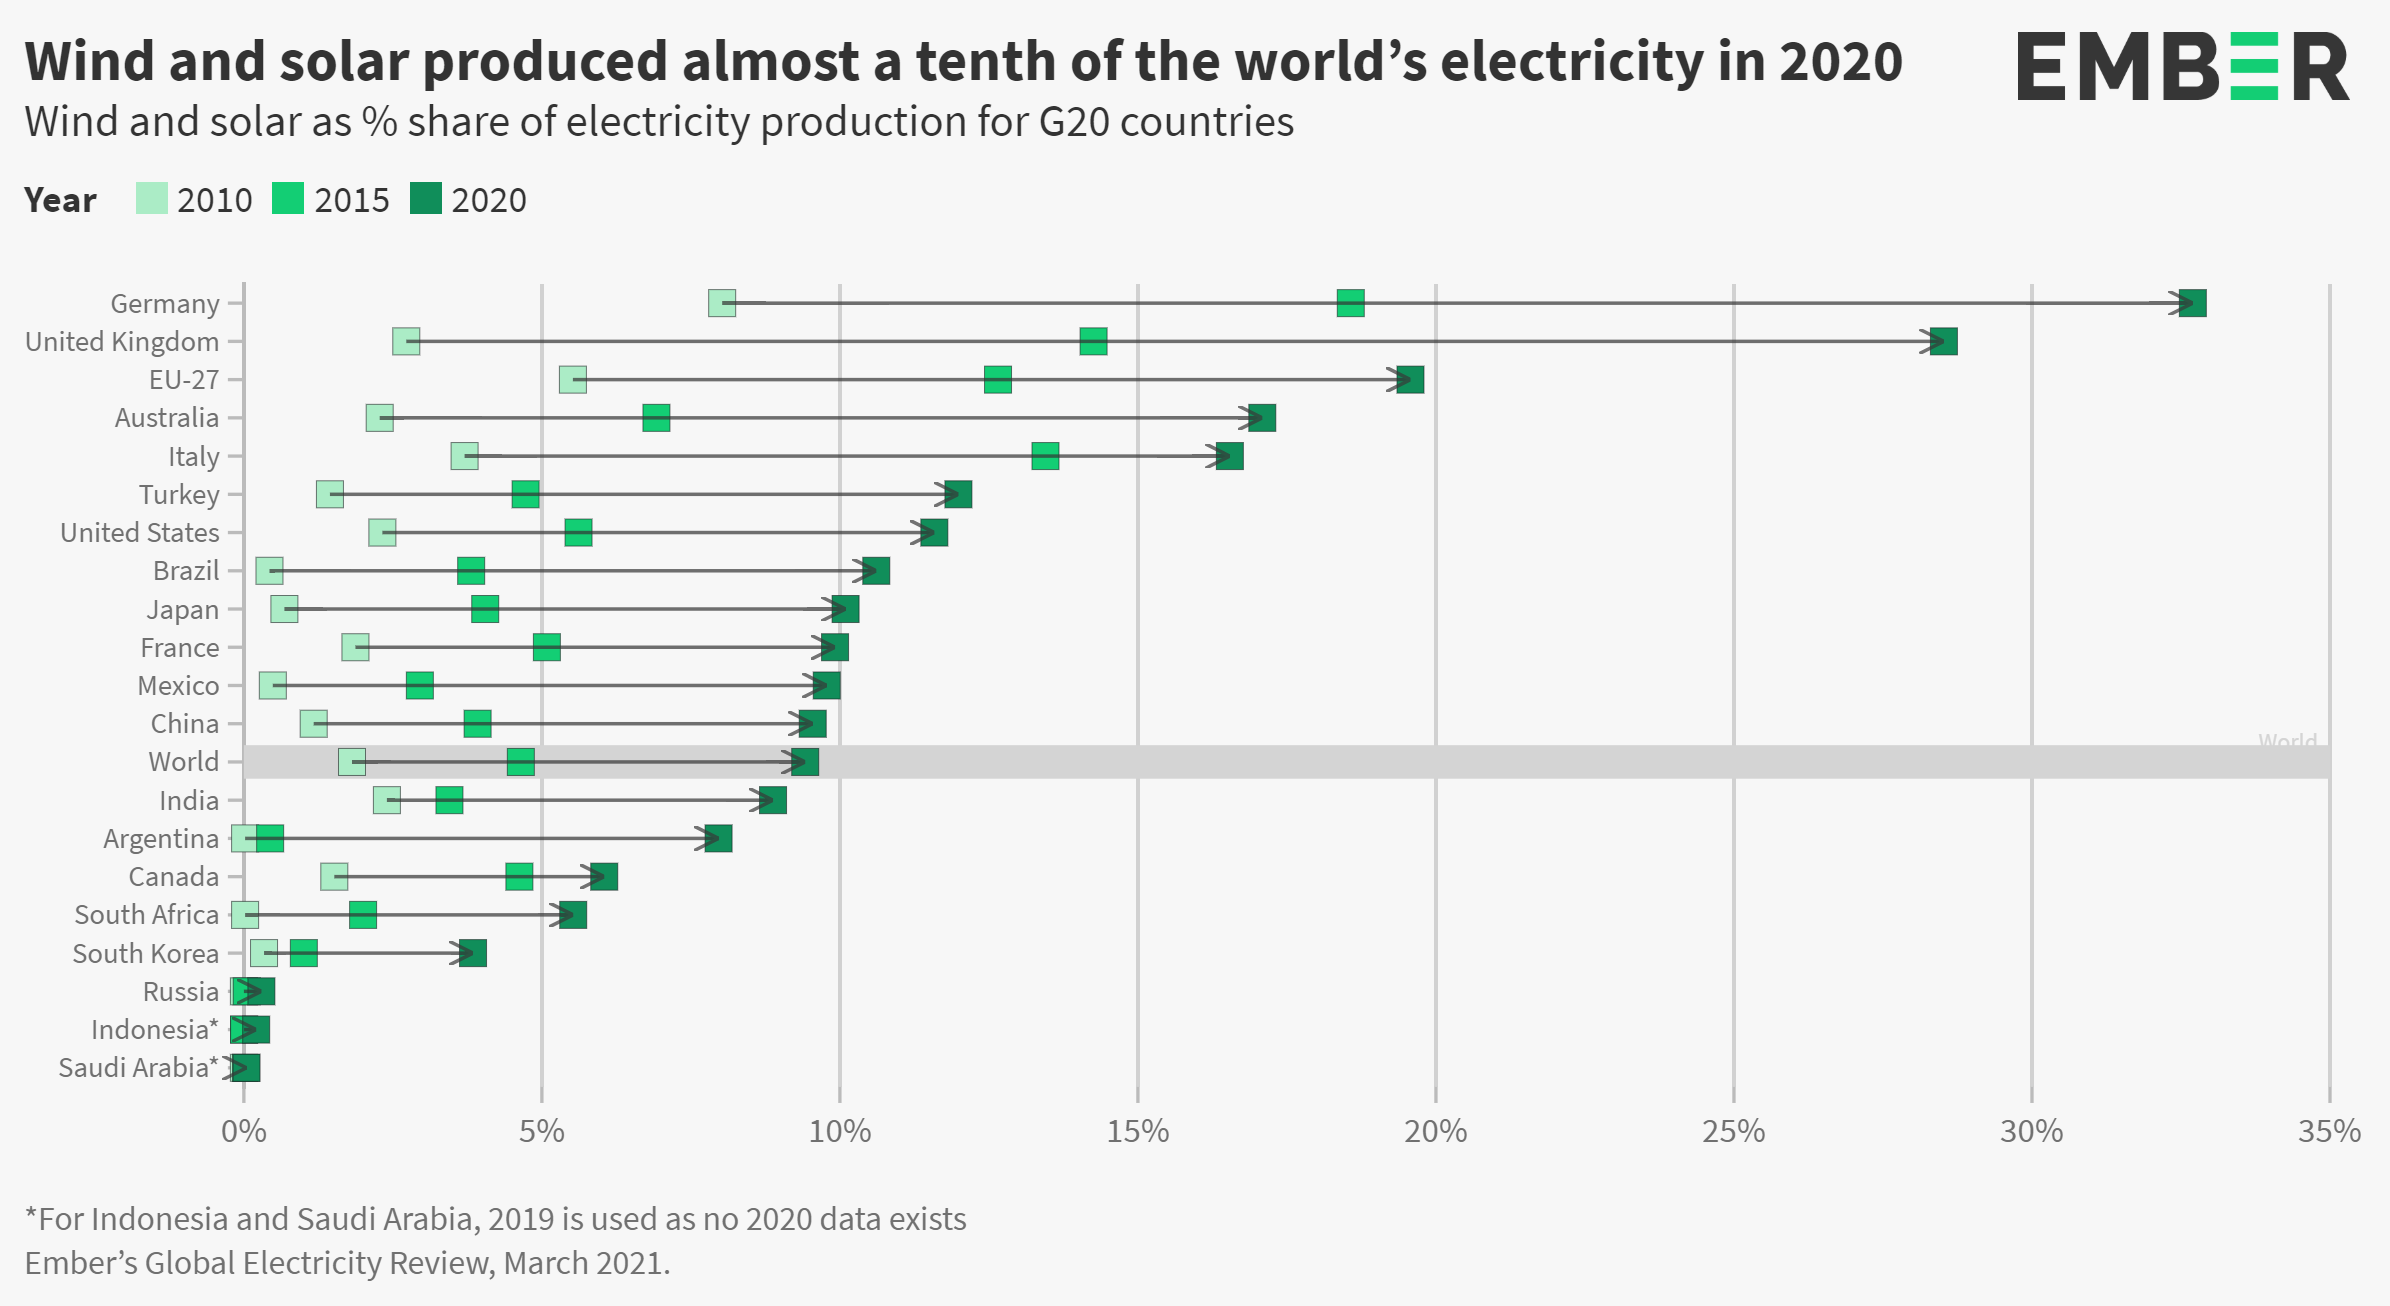 UK is second behind Germany in G20 for share of electricity sourced from wind and solar